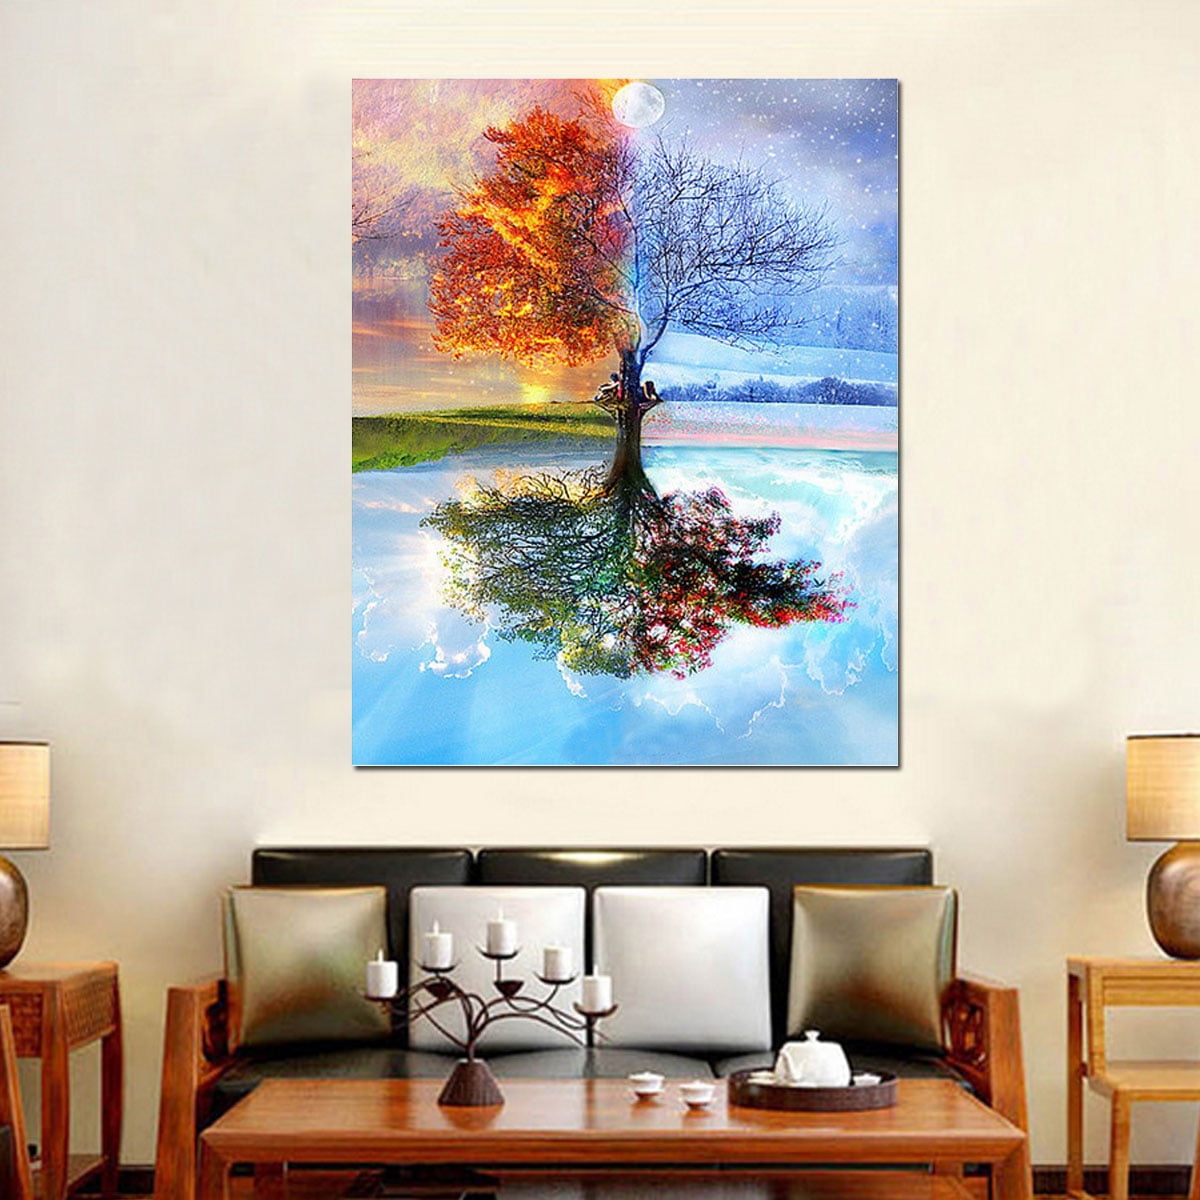 City Own Picture for Home Decor Scenery Painting by Numbers Night Picture with Frame DIY Landscape Painting by Canvas with Unique Design Best Gift